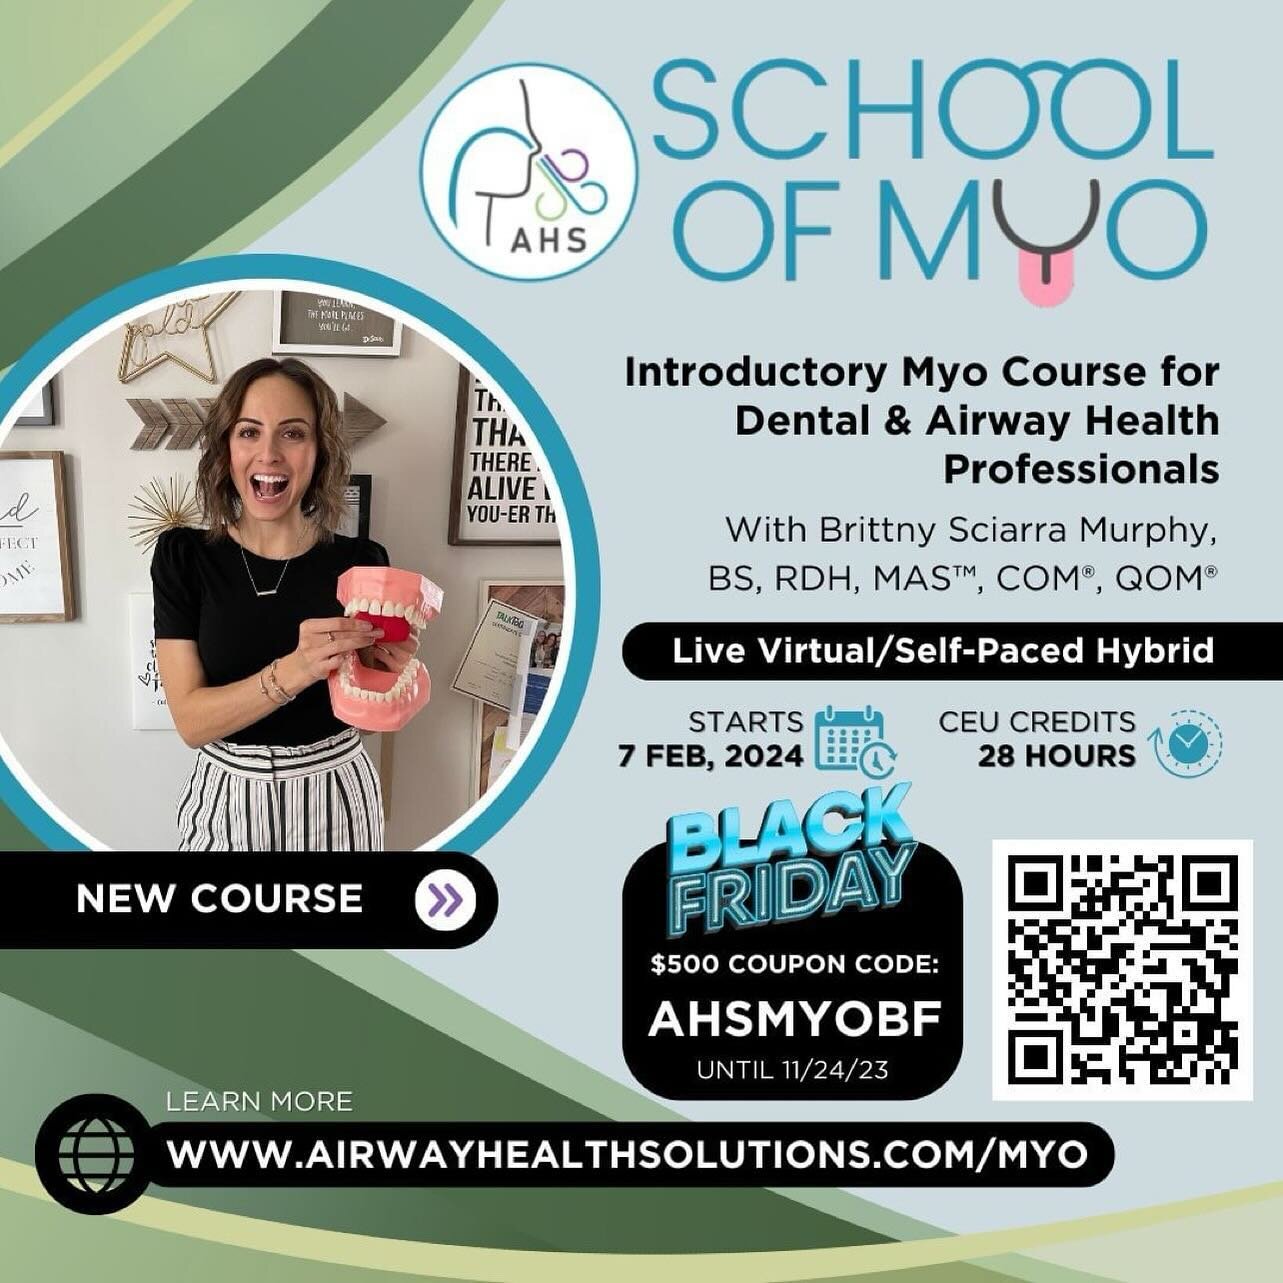 Repost from @airwayhealthsolutions
&bull;
📣📣📣 Attention Dental &amp; Airway Professionals!

🔥 We have some truly exciting news for you!

Airway Health Solutions is thrilled to introduce the School of Myo&mdash;an innovative curriculum designed to